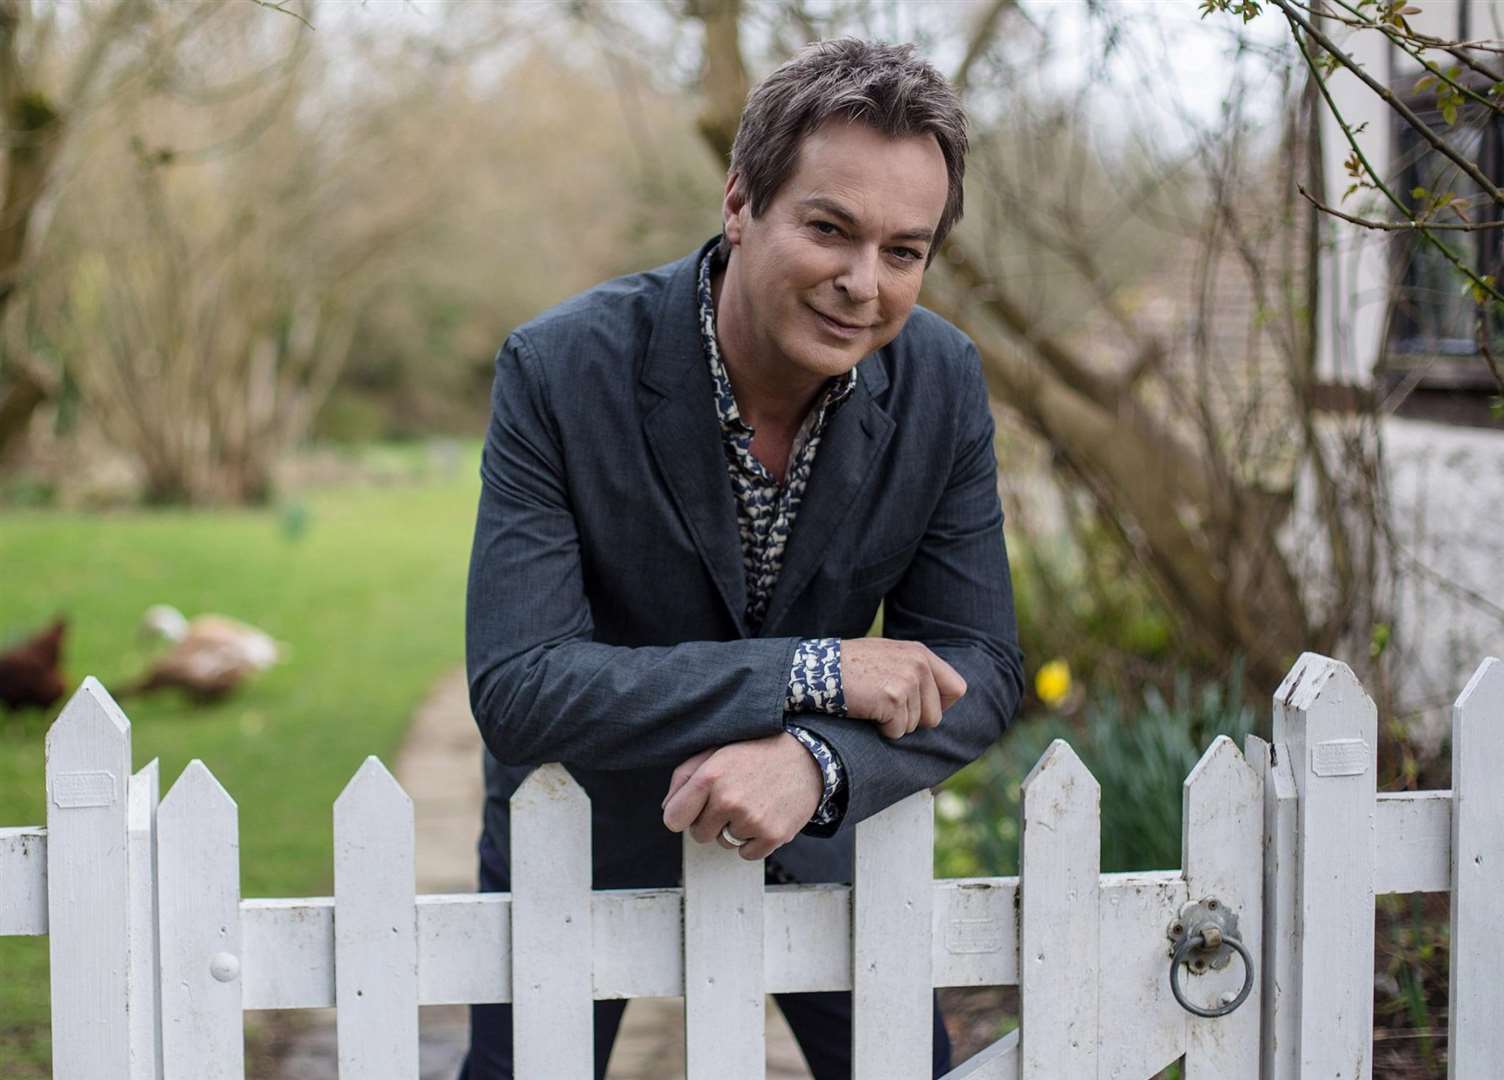 Julian Clary lives near Ashford but won't be coming back to Chatham any time soon